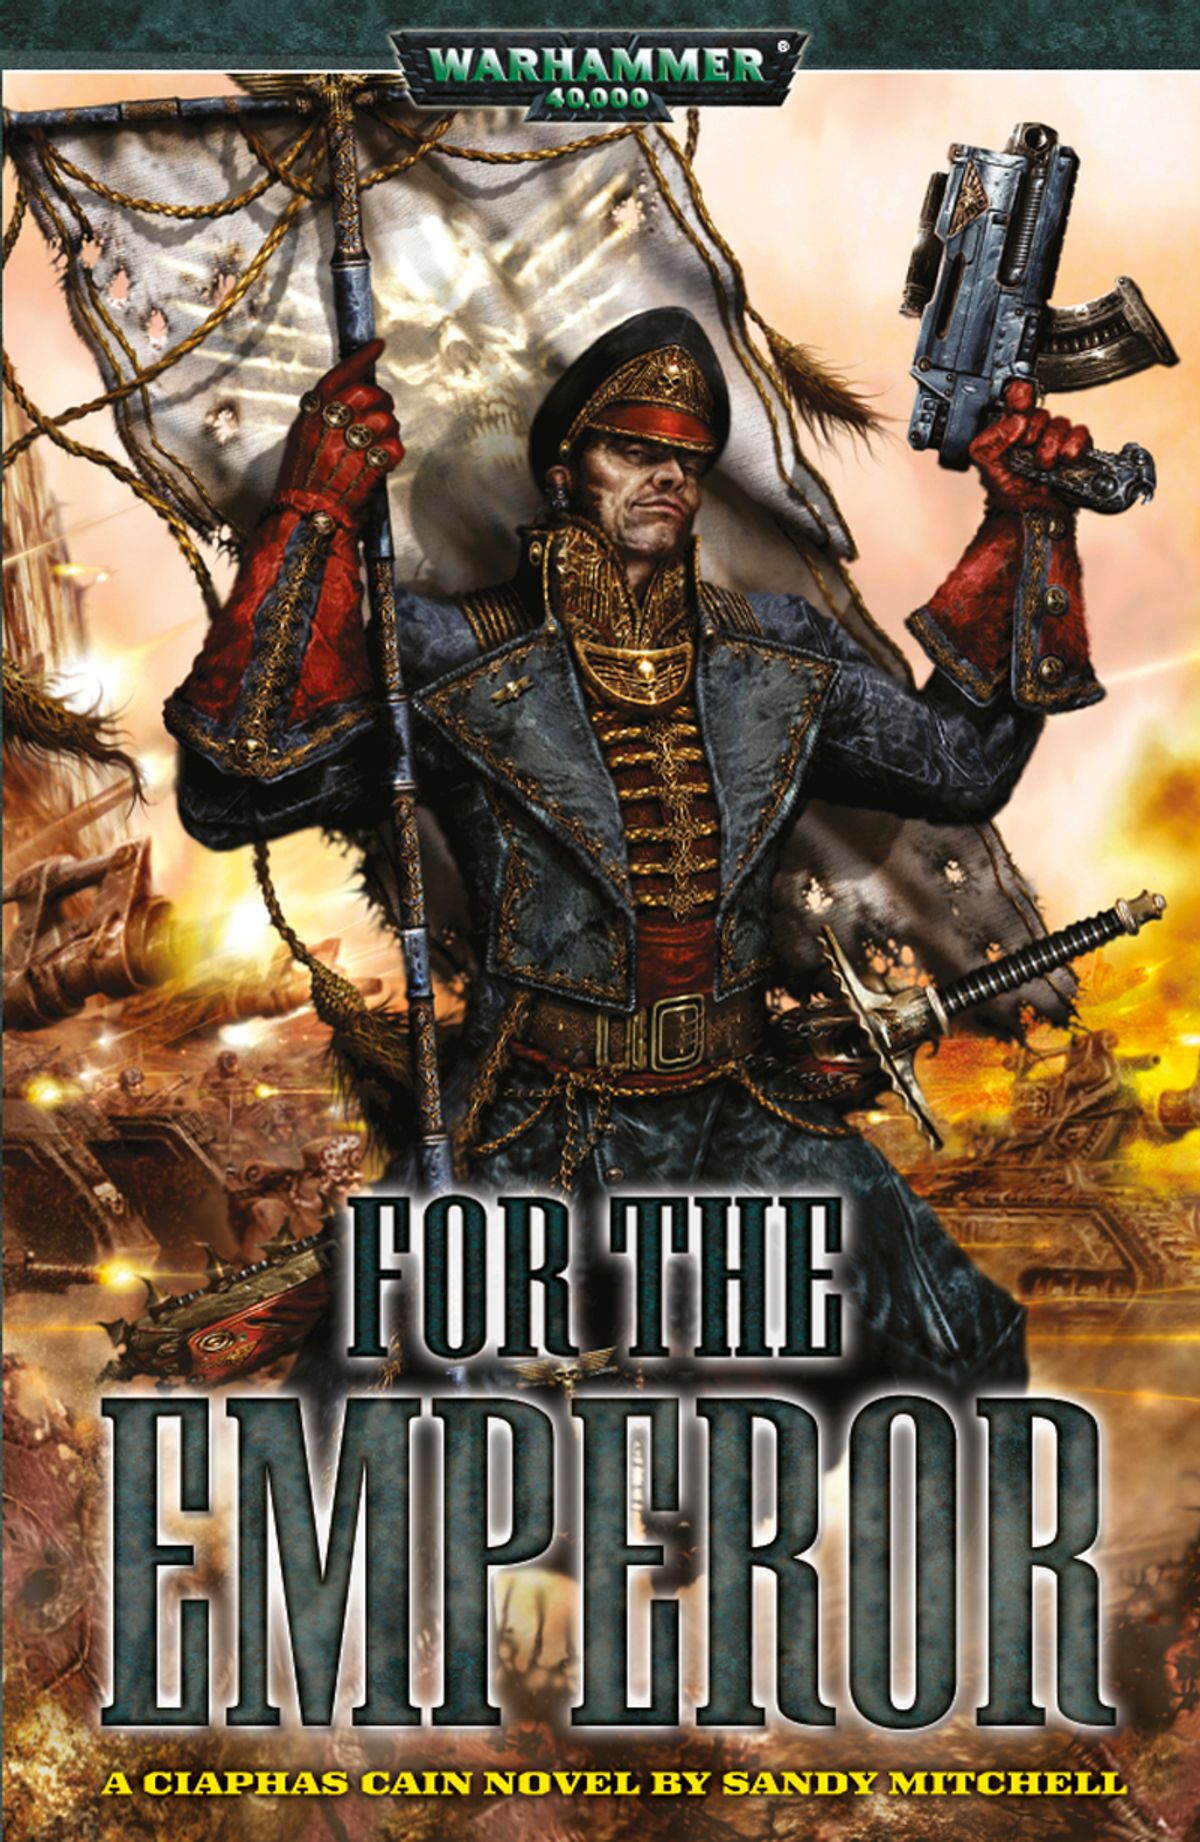 Ciaphas Cain: For the Emperor by Sandy Mitchell